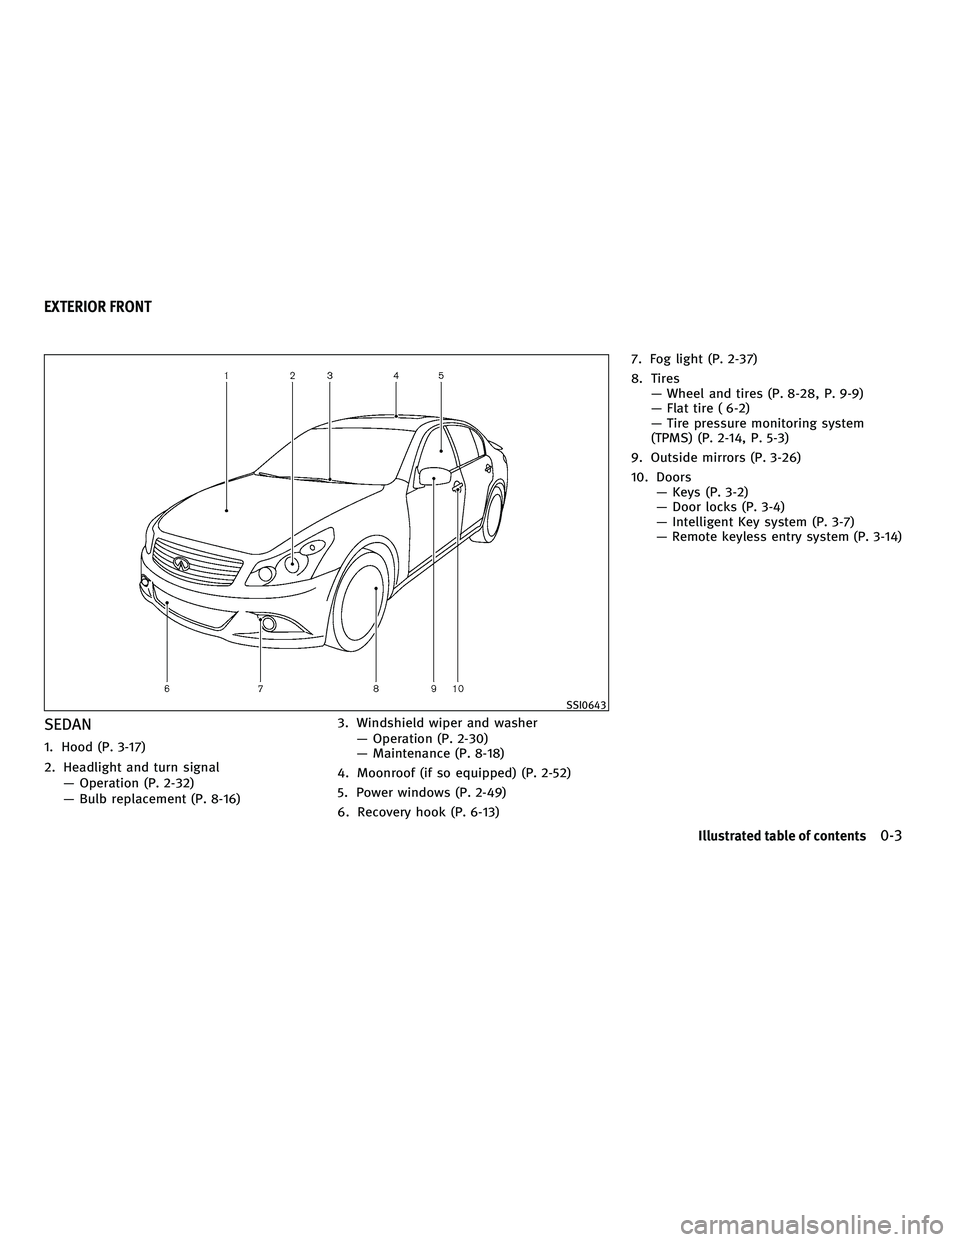 INFINITI G 2010  Owners Manual SEDAN
1. Hood (P. 3-17)
2. Headlight and turn signal— Operation (P. 2-32)
— Bulb replacement (P. 8-16) 3. Windshield wiper and washer
— Operation (P. 2-30)
— Maintenance (P. 8-18)
4. Moonroof 